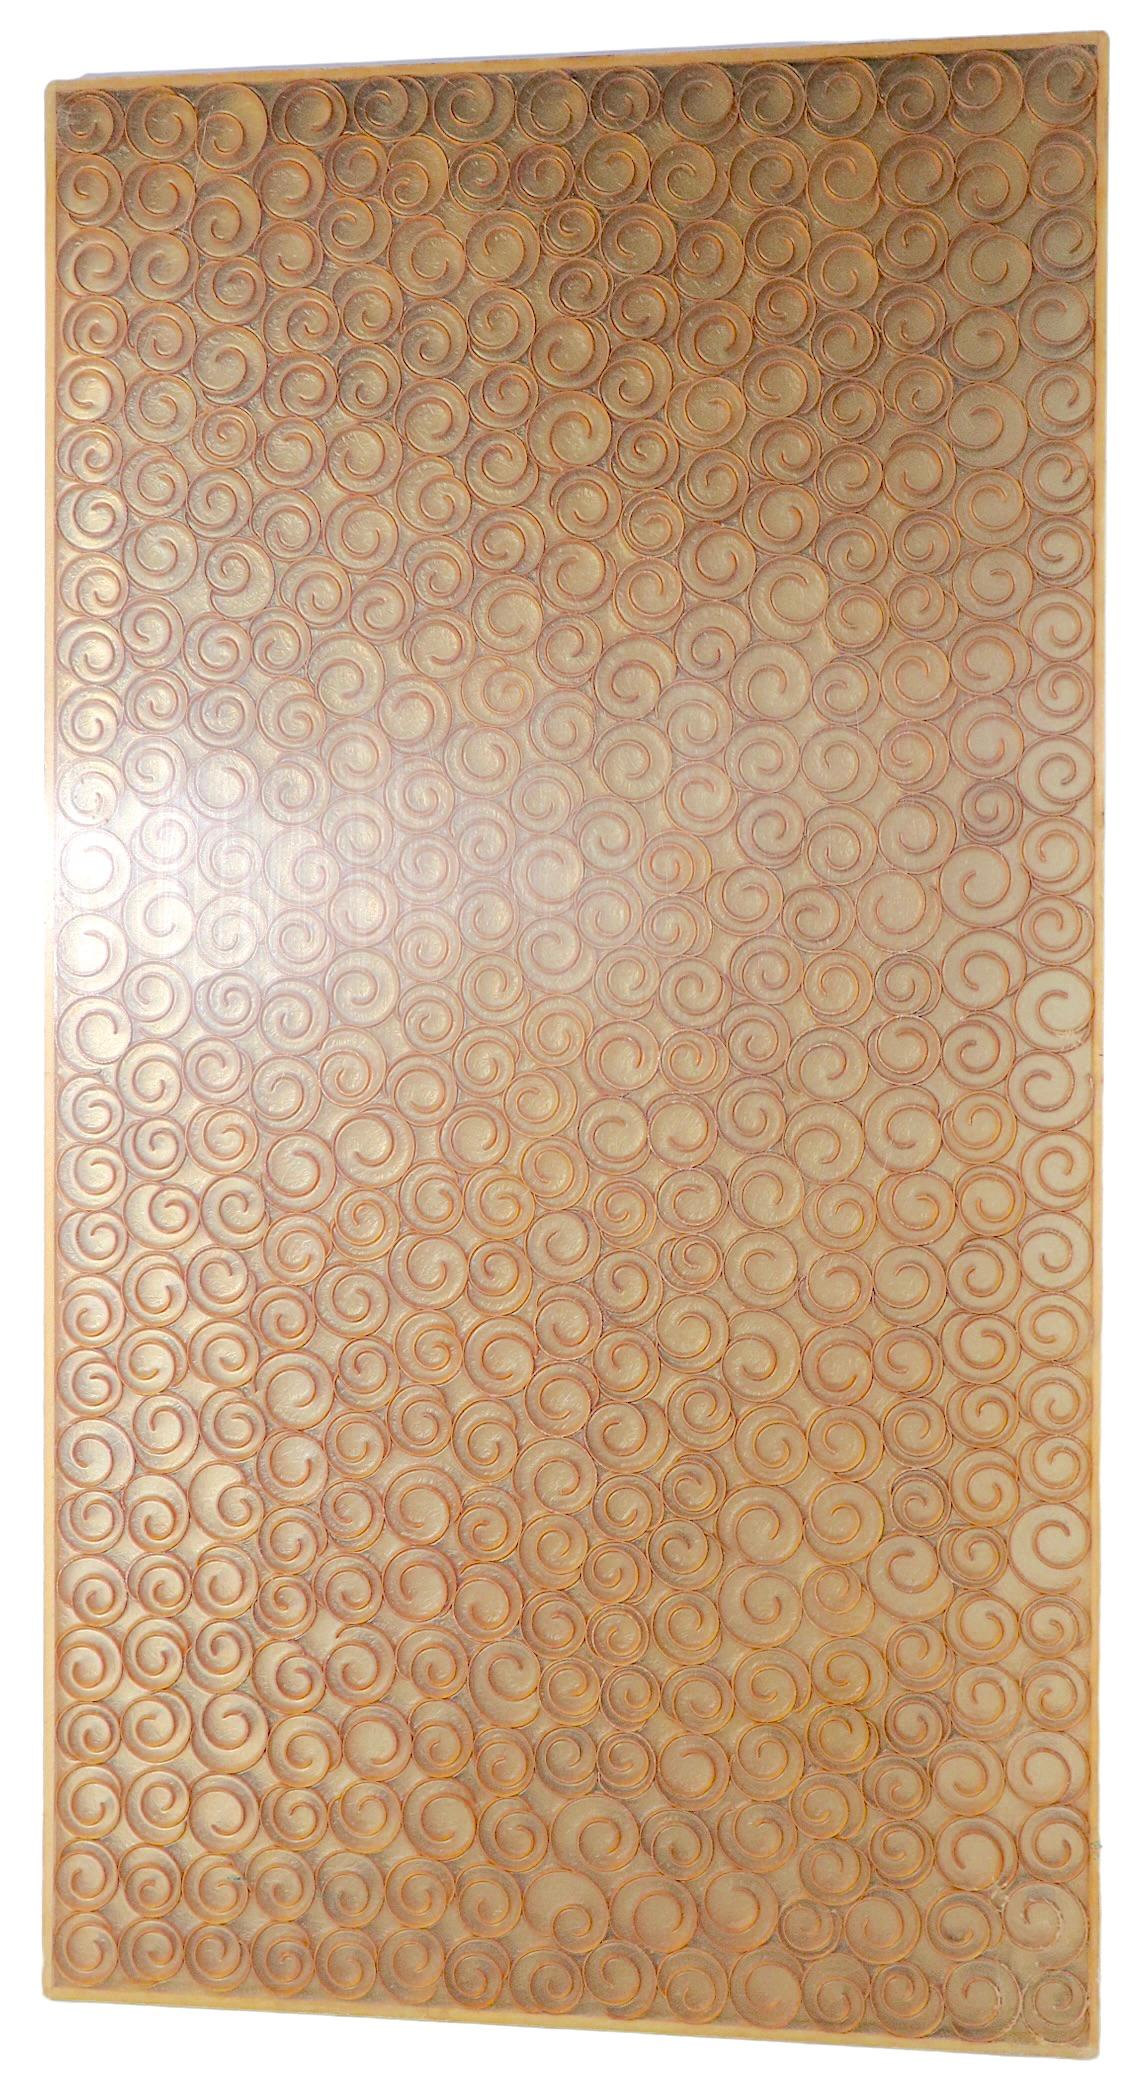 20th Century Modernist Translucent Architectural Panel with Repeating Curlicue Field Motif For Sale